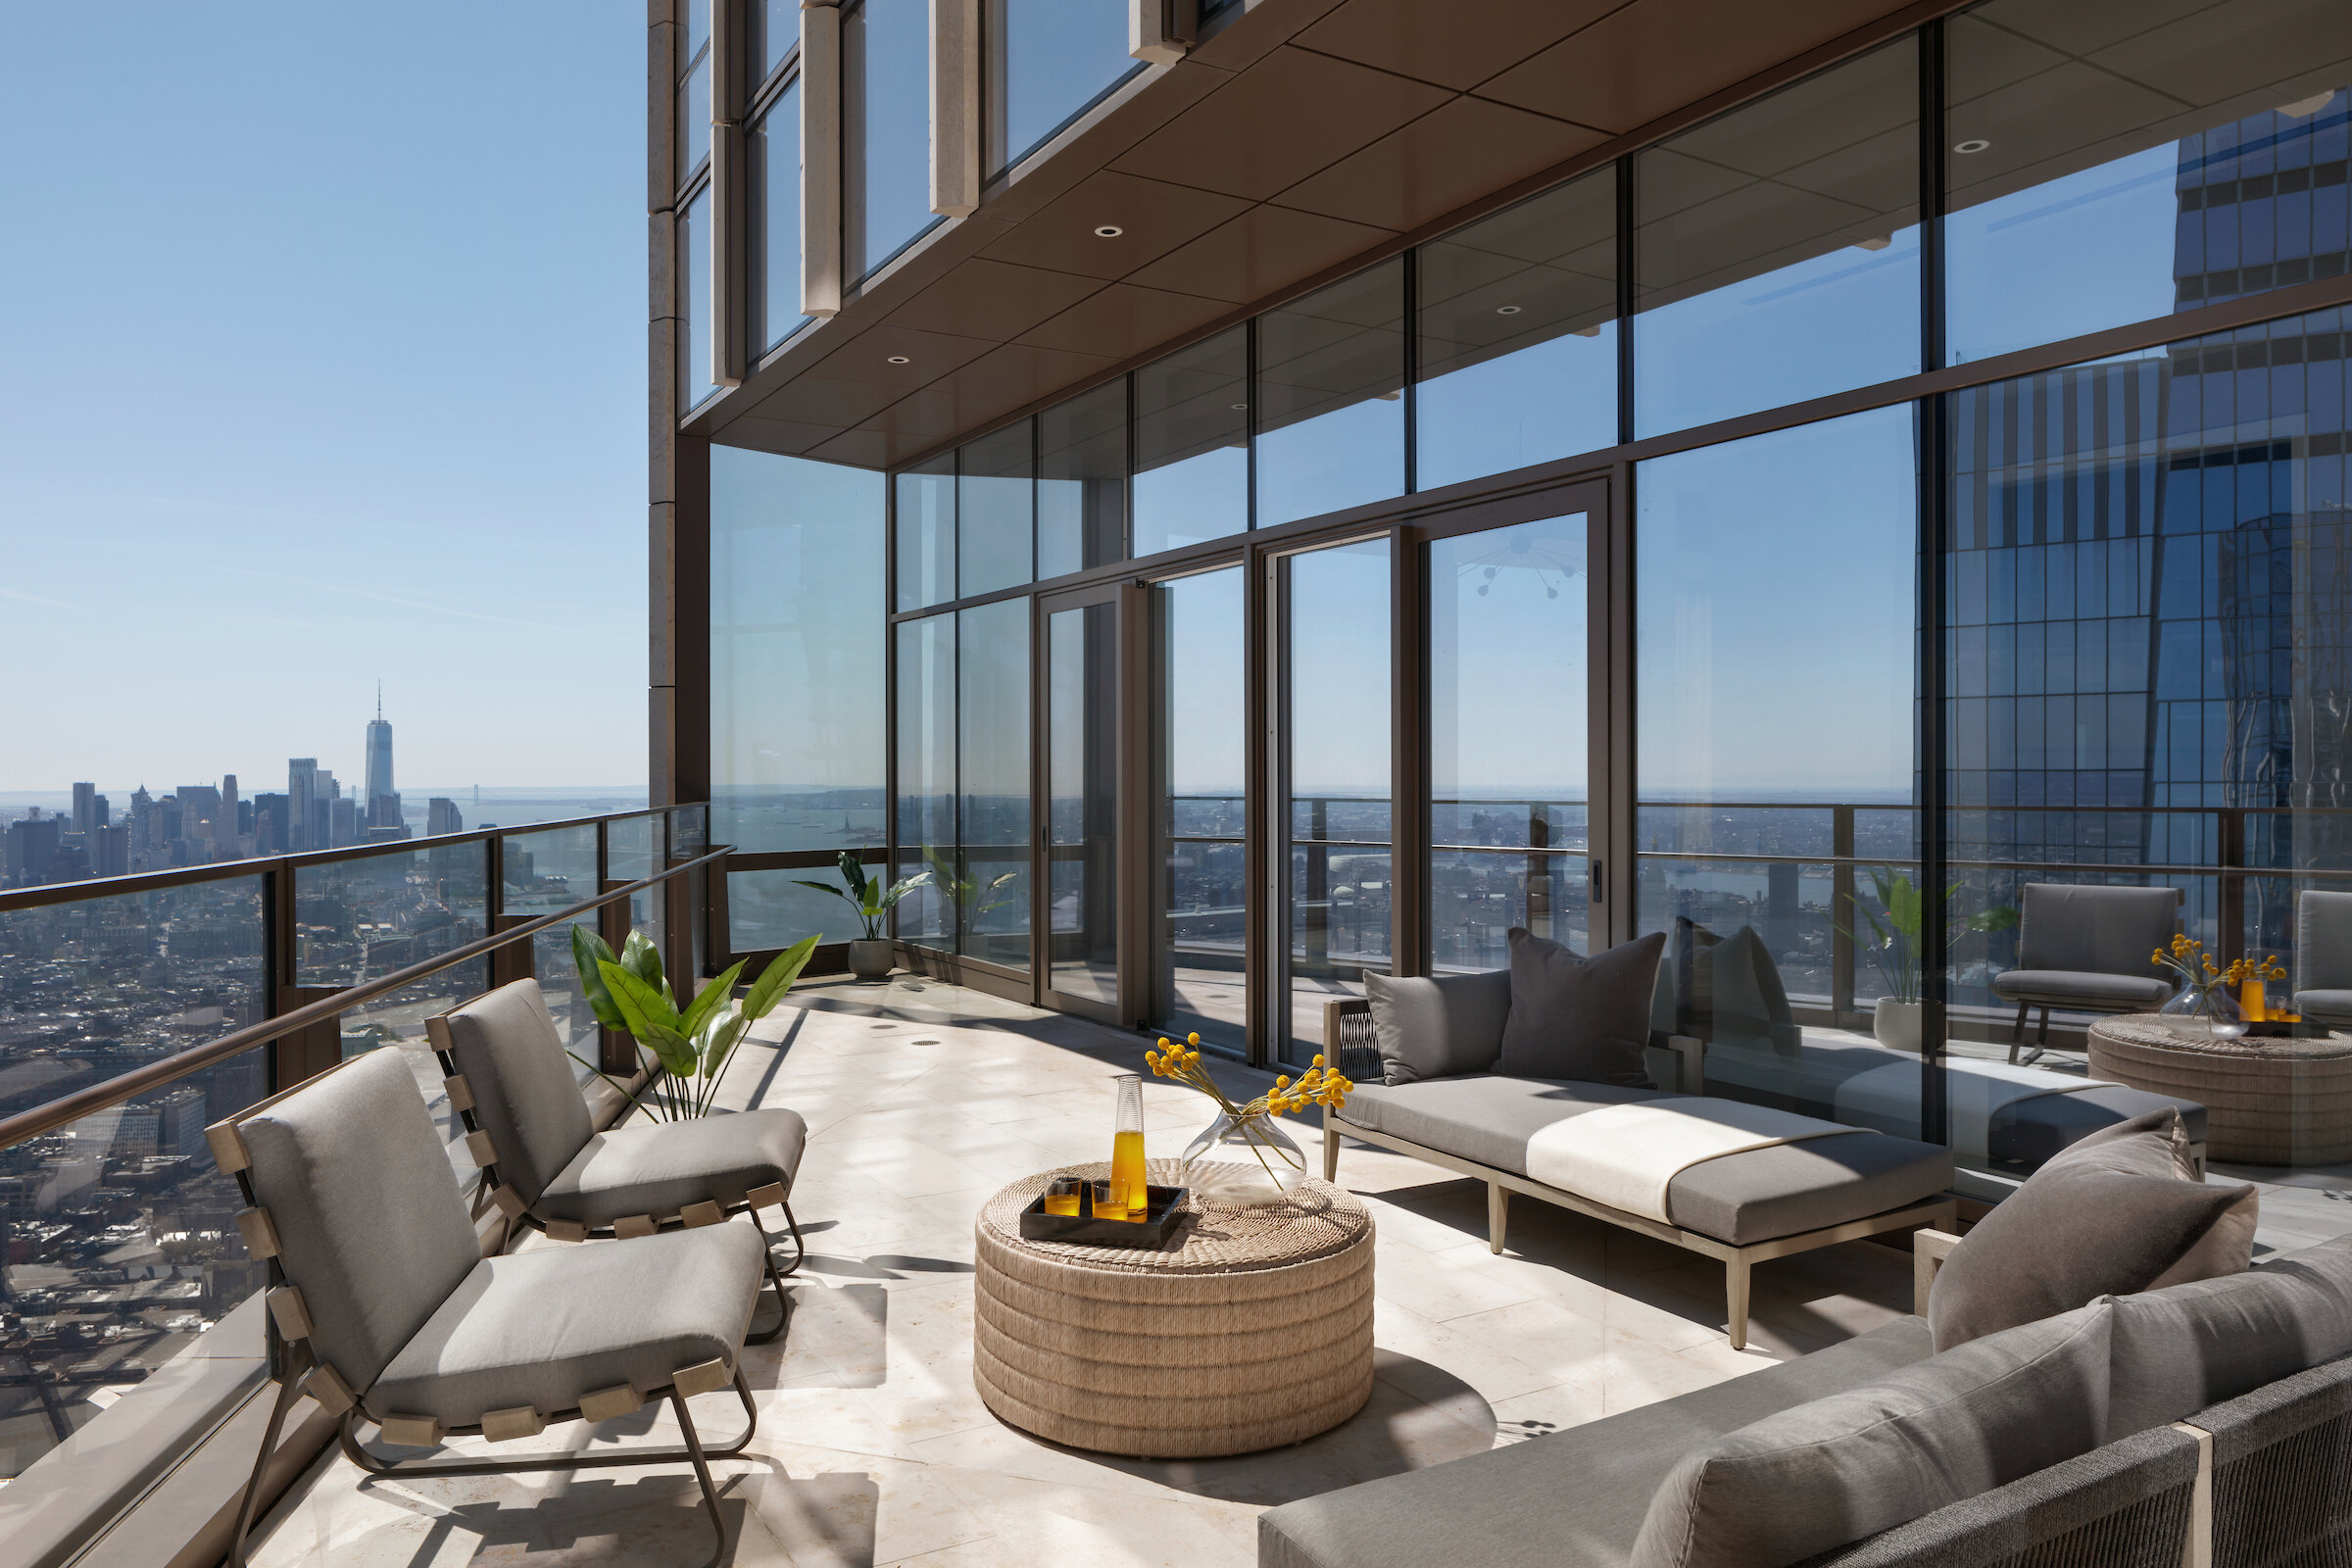  Enter this remarkable 10,171 square foot compound in the sky that encompasses the entire 90th floor by private elevator. The expertly planned residence boasts a gracious entry foyer, 14-foot ceilings and lavish finish 7.5 inch wide French oak floors